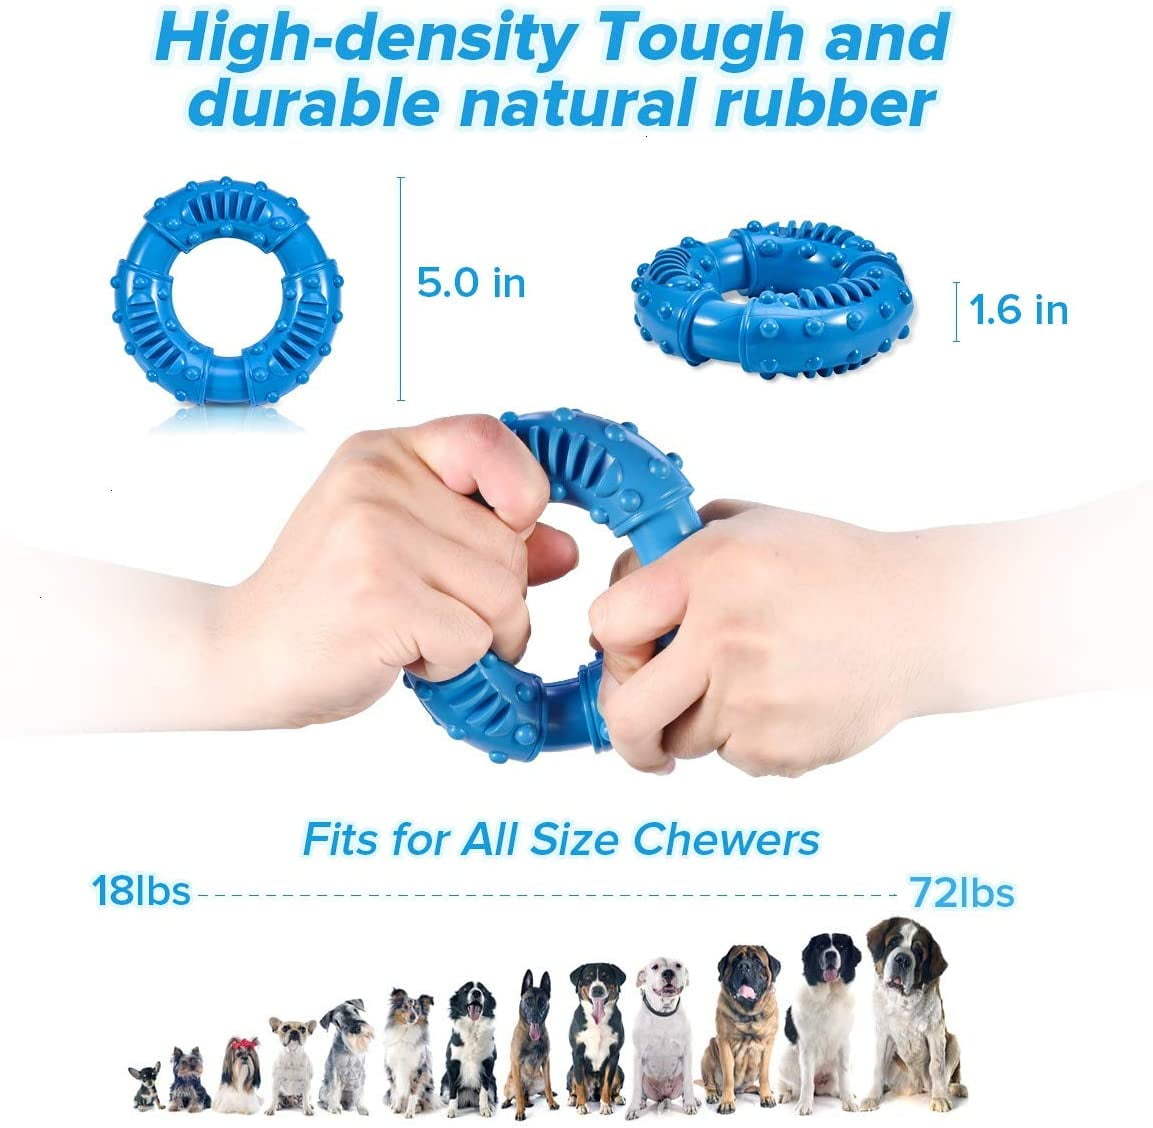 1packs Dog Chew Bone Toy for Aggressive Chewers: Especially Chewy Natural Rubber, Puppy Chew Toy, Durable and Almost Indestructible for Medium and